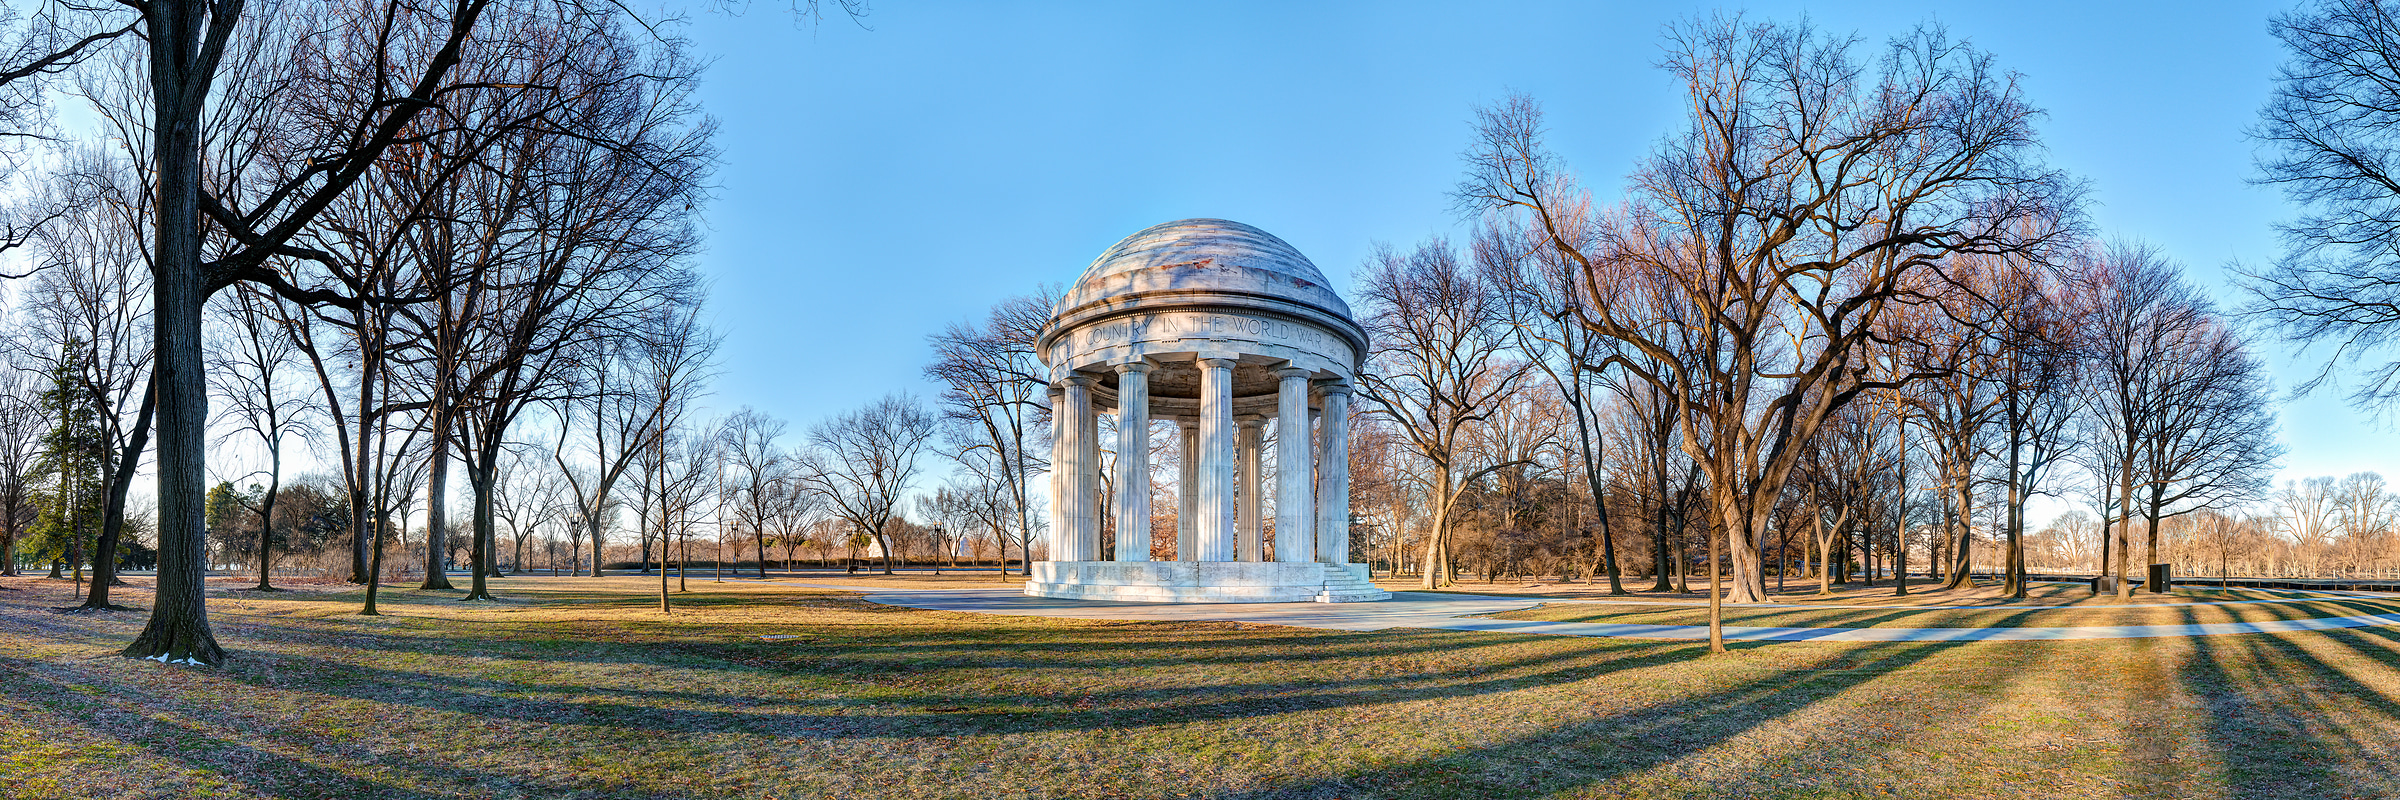 276 megapixels! A very high resolution, large-format VAST photo print of the Washington D.C. War Memorial; panorama photograph created by Tim Lo Monaco in D.C. War Memorial, National Mall, Washington, D.C.